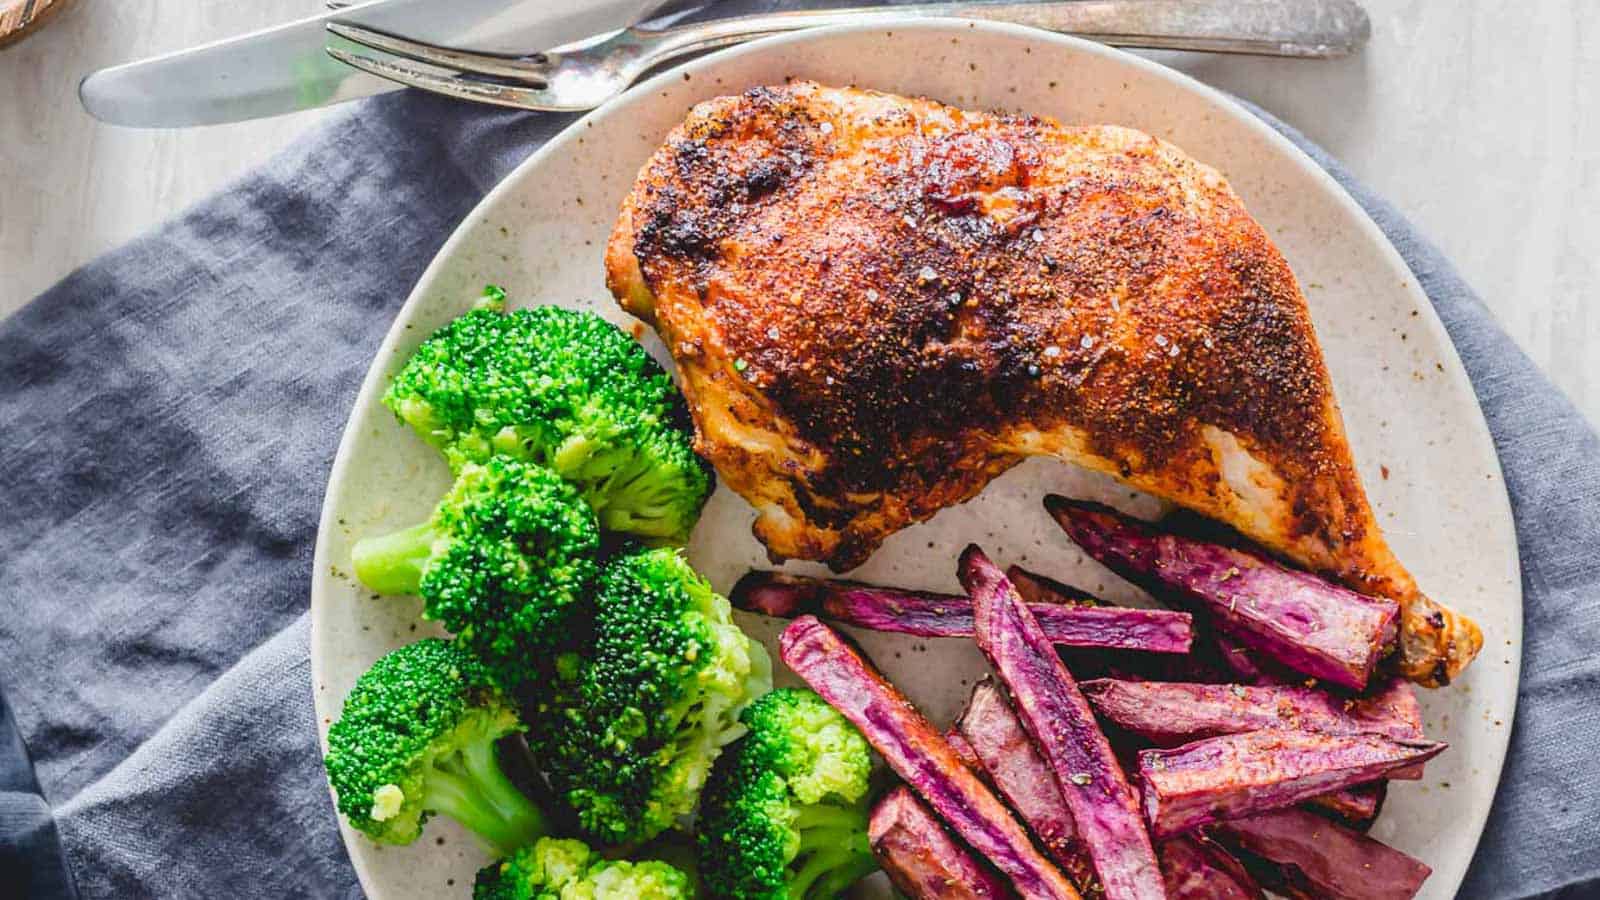 Air fryer chicken leg quarters on a plate with broccoli and purple sweet potato fries.